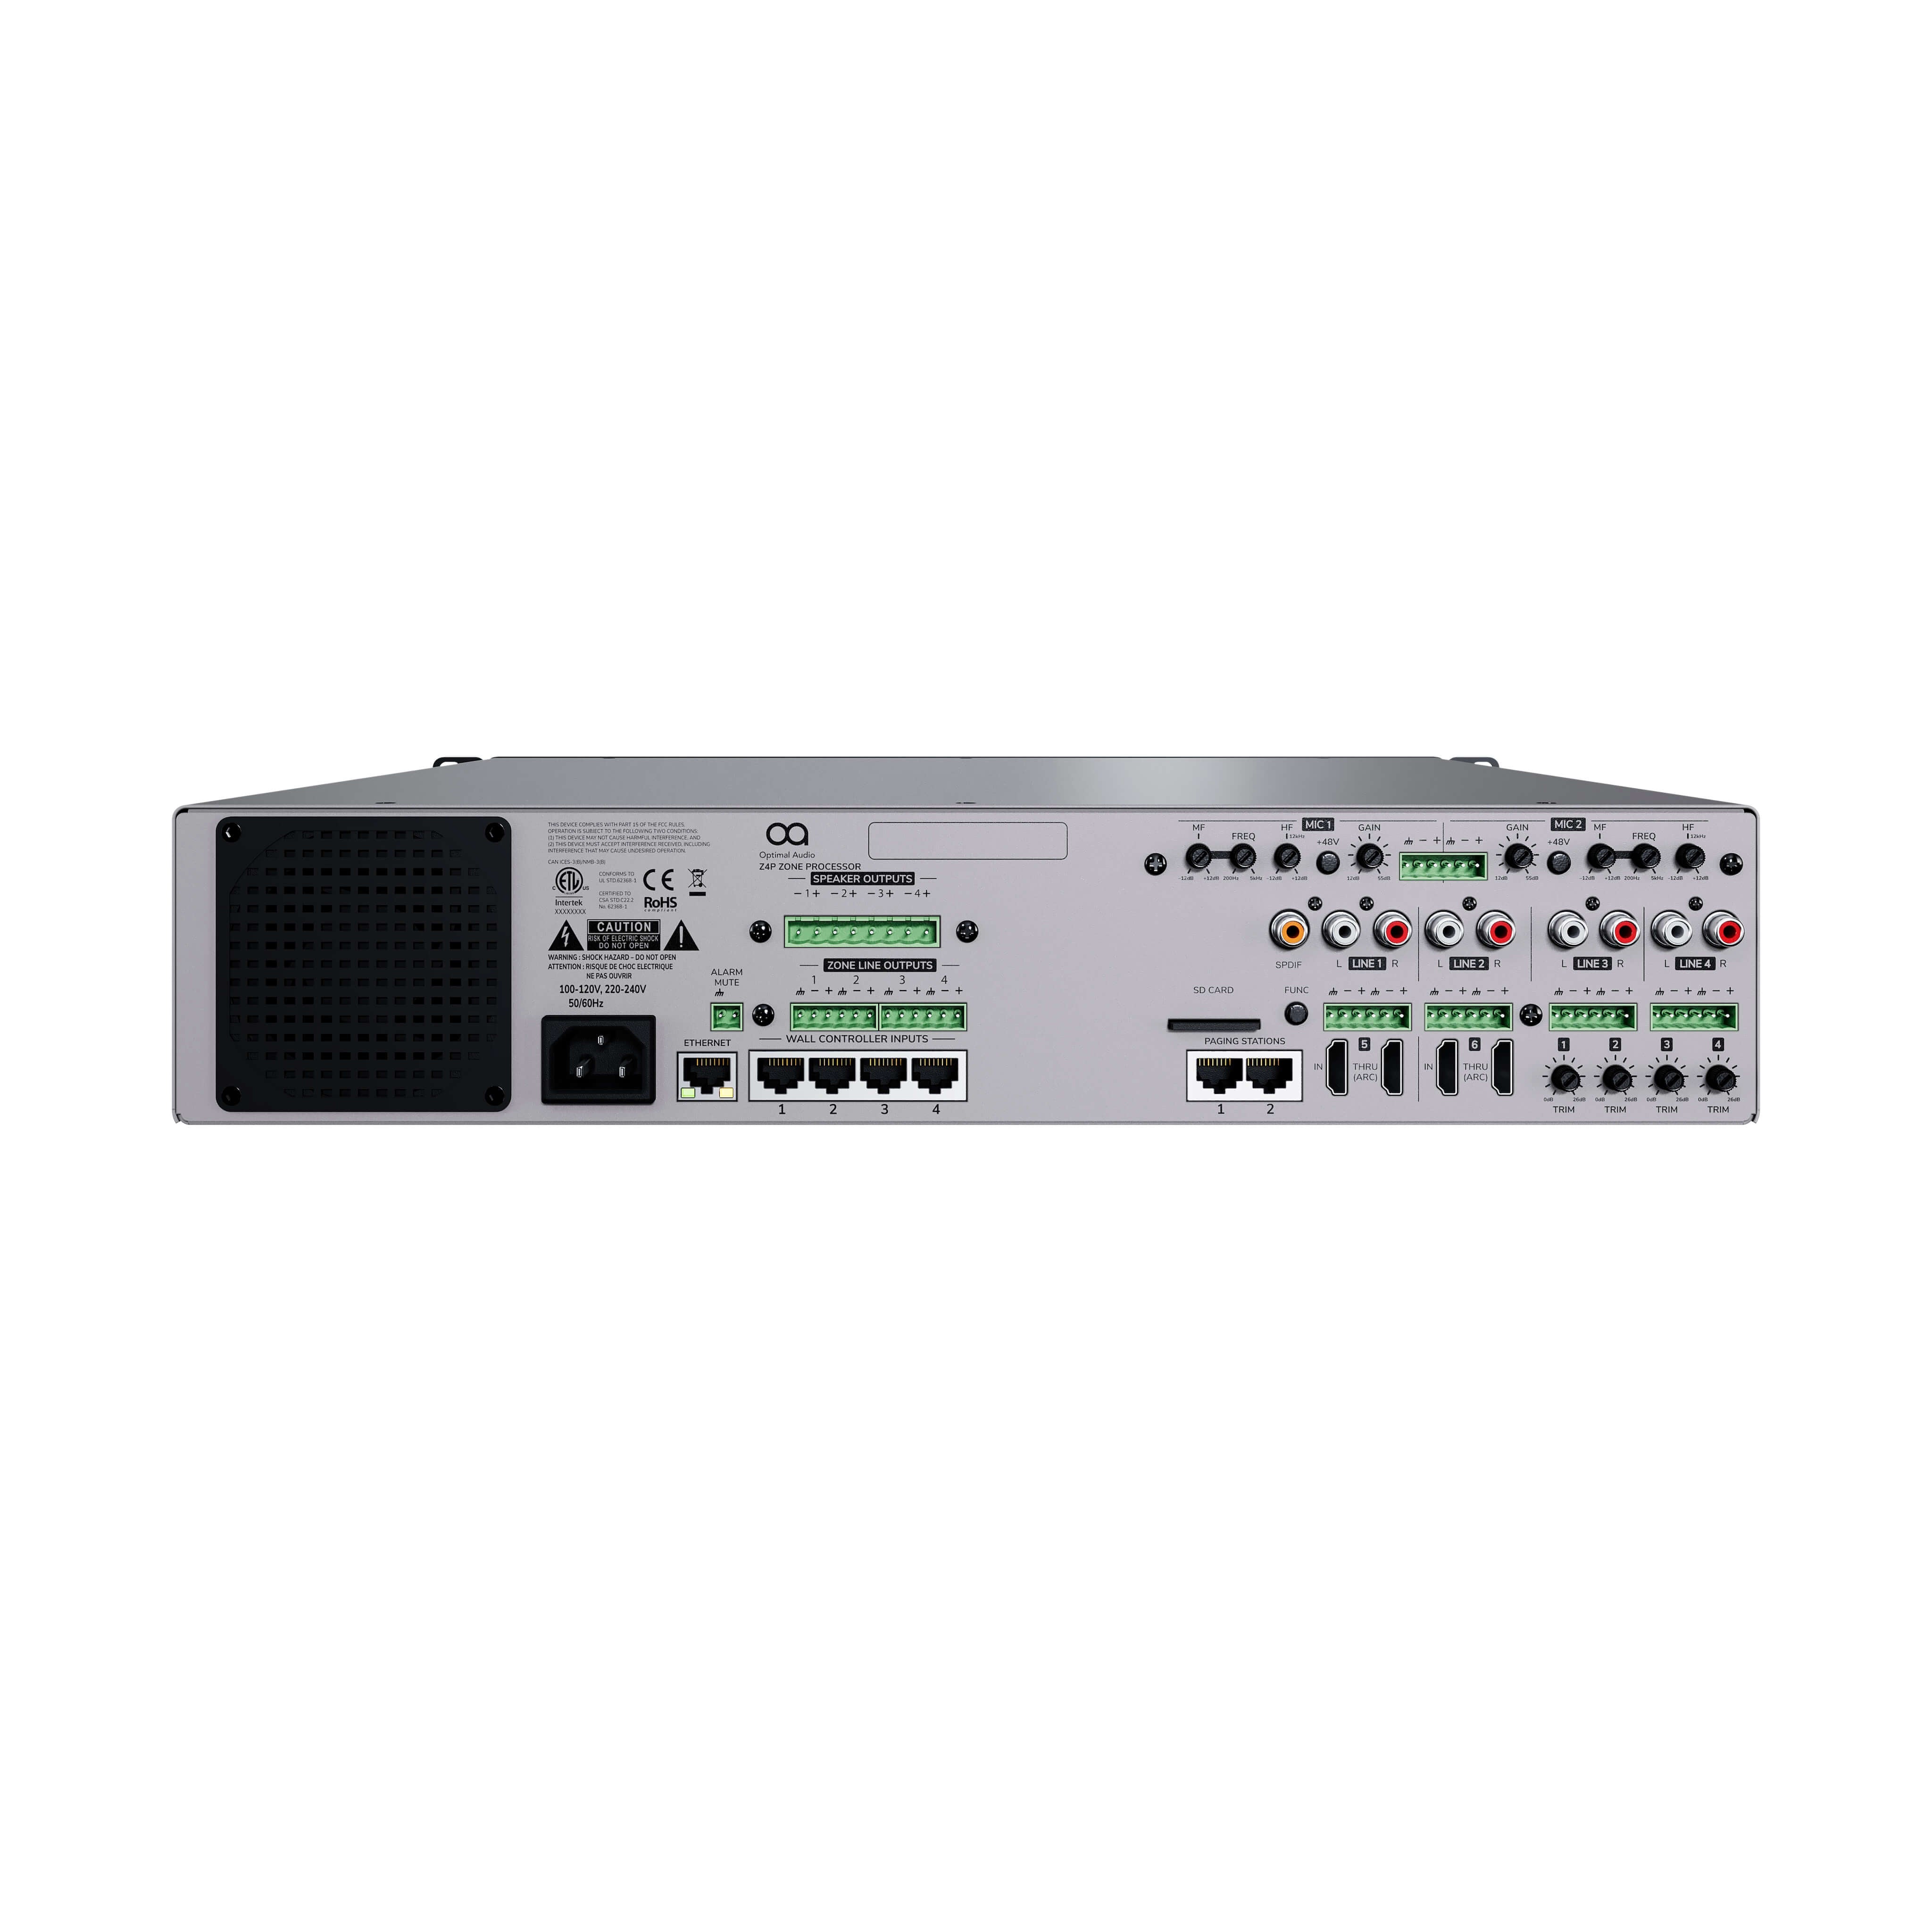 Optimal Audio Zone 4P - 4 Zone Audio Controller with DSP, rear